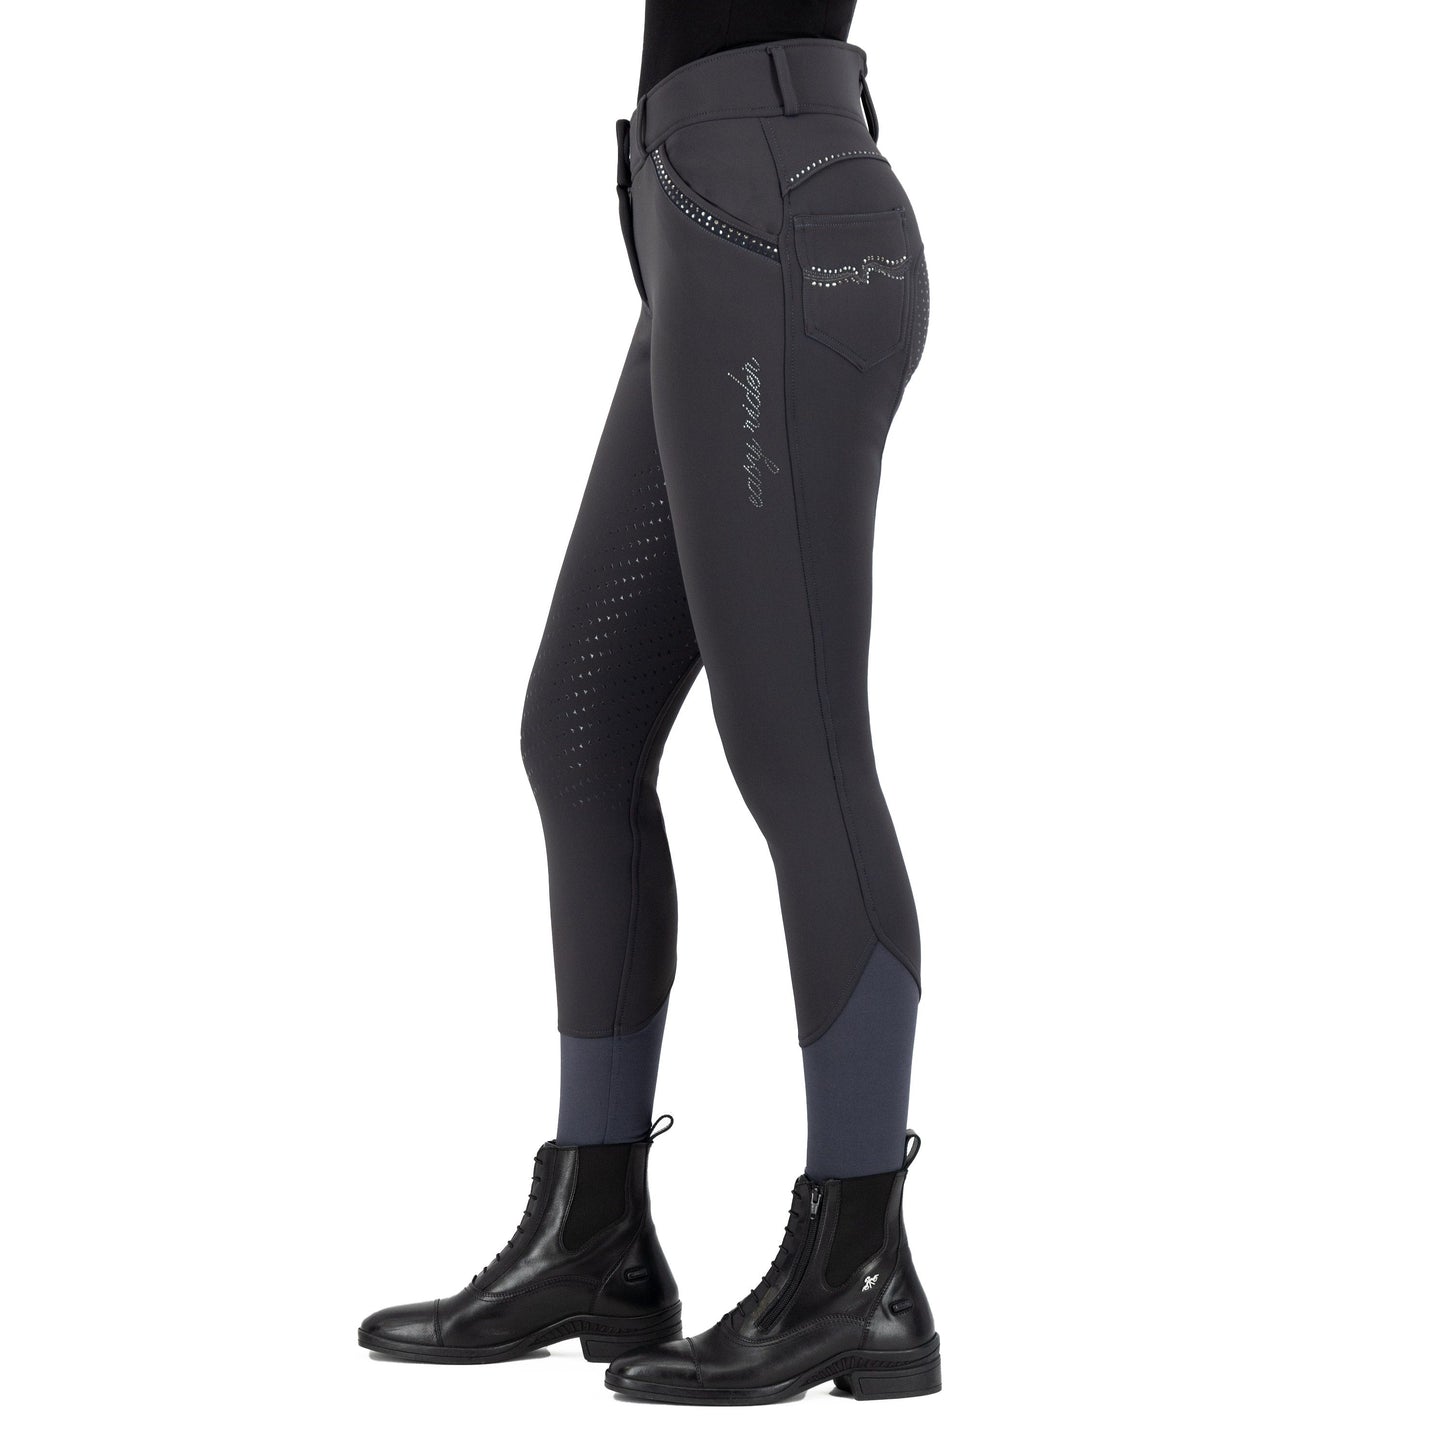 Easy Rider Periscope Emilie Breeches with Full Silicone Seat